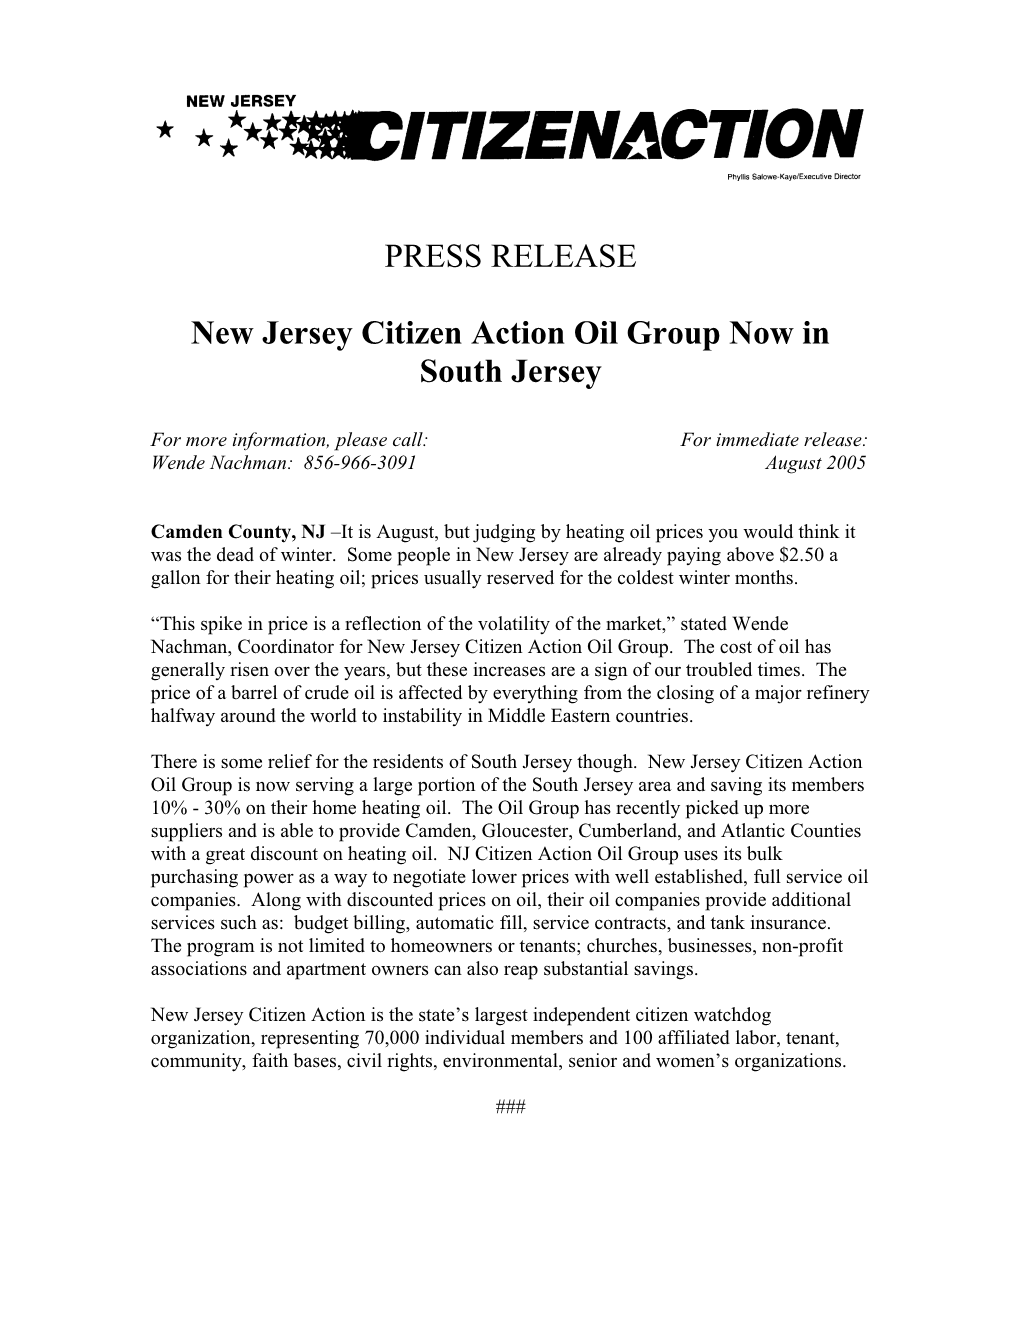 New Jersey Citizen Action Oil Group Now in South Jersey